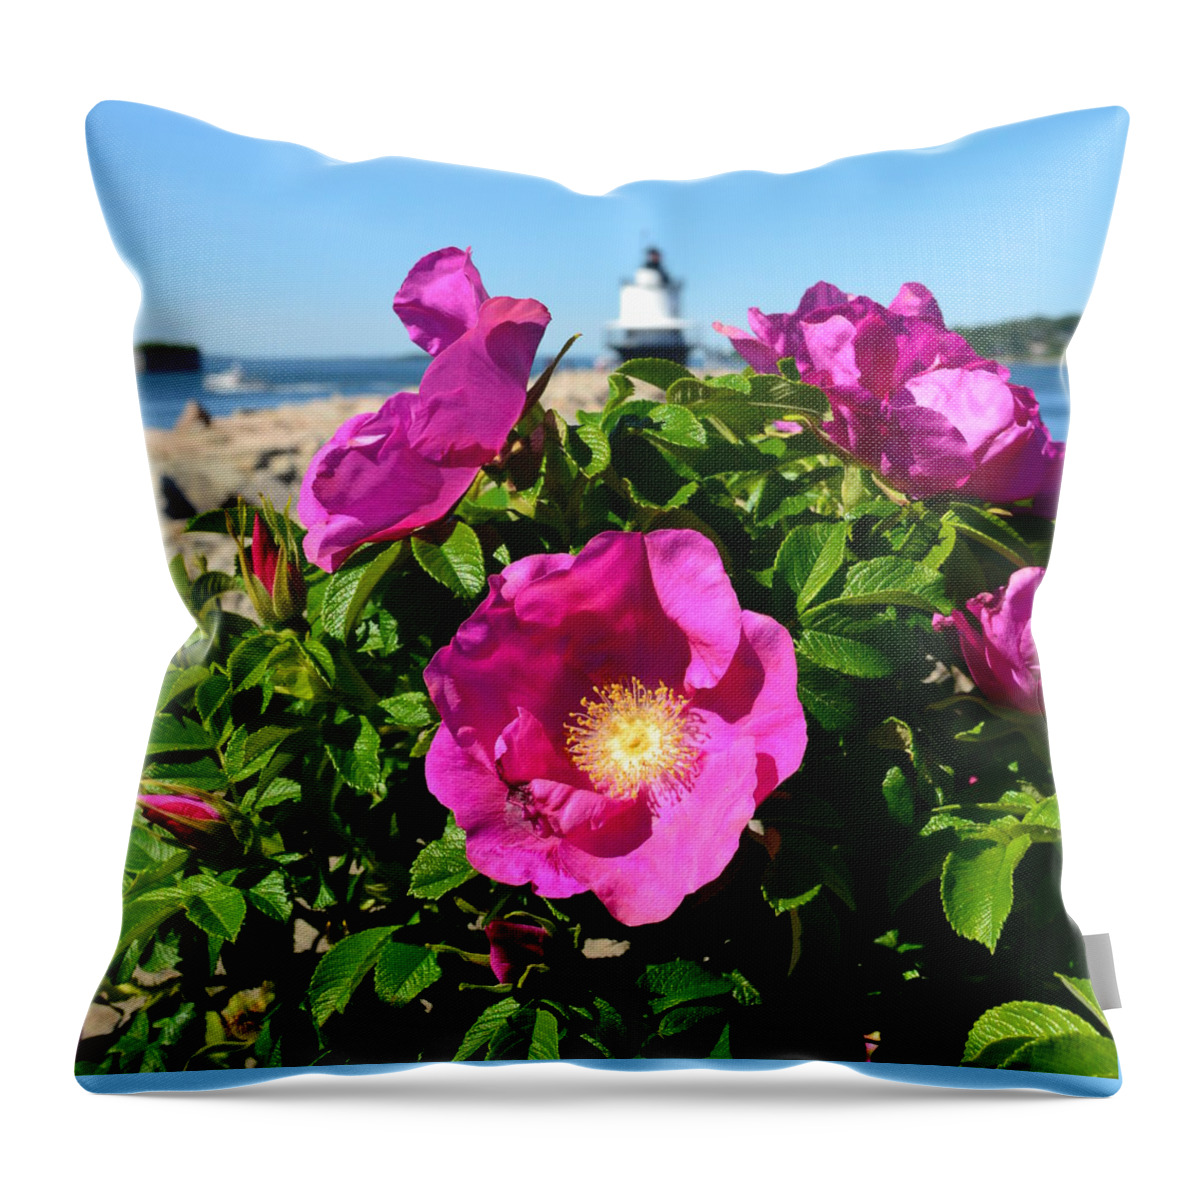 Sea Roses Throw Pillow featuring the photograph Sea Roses by Colleen Phaedra